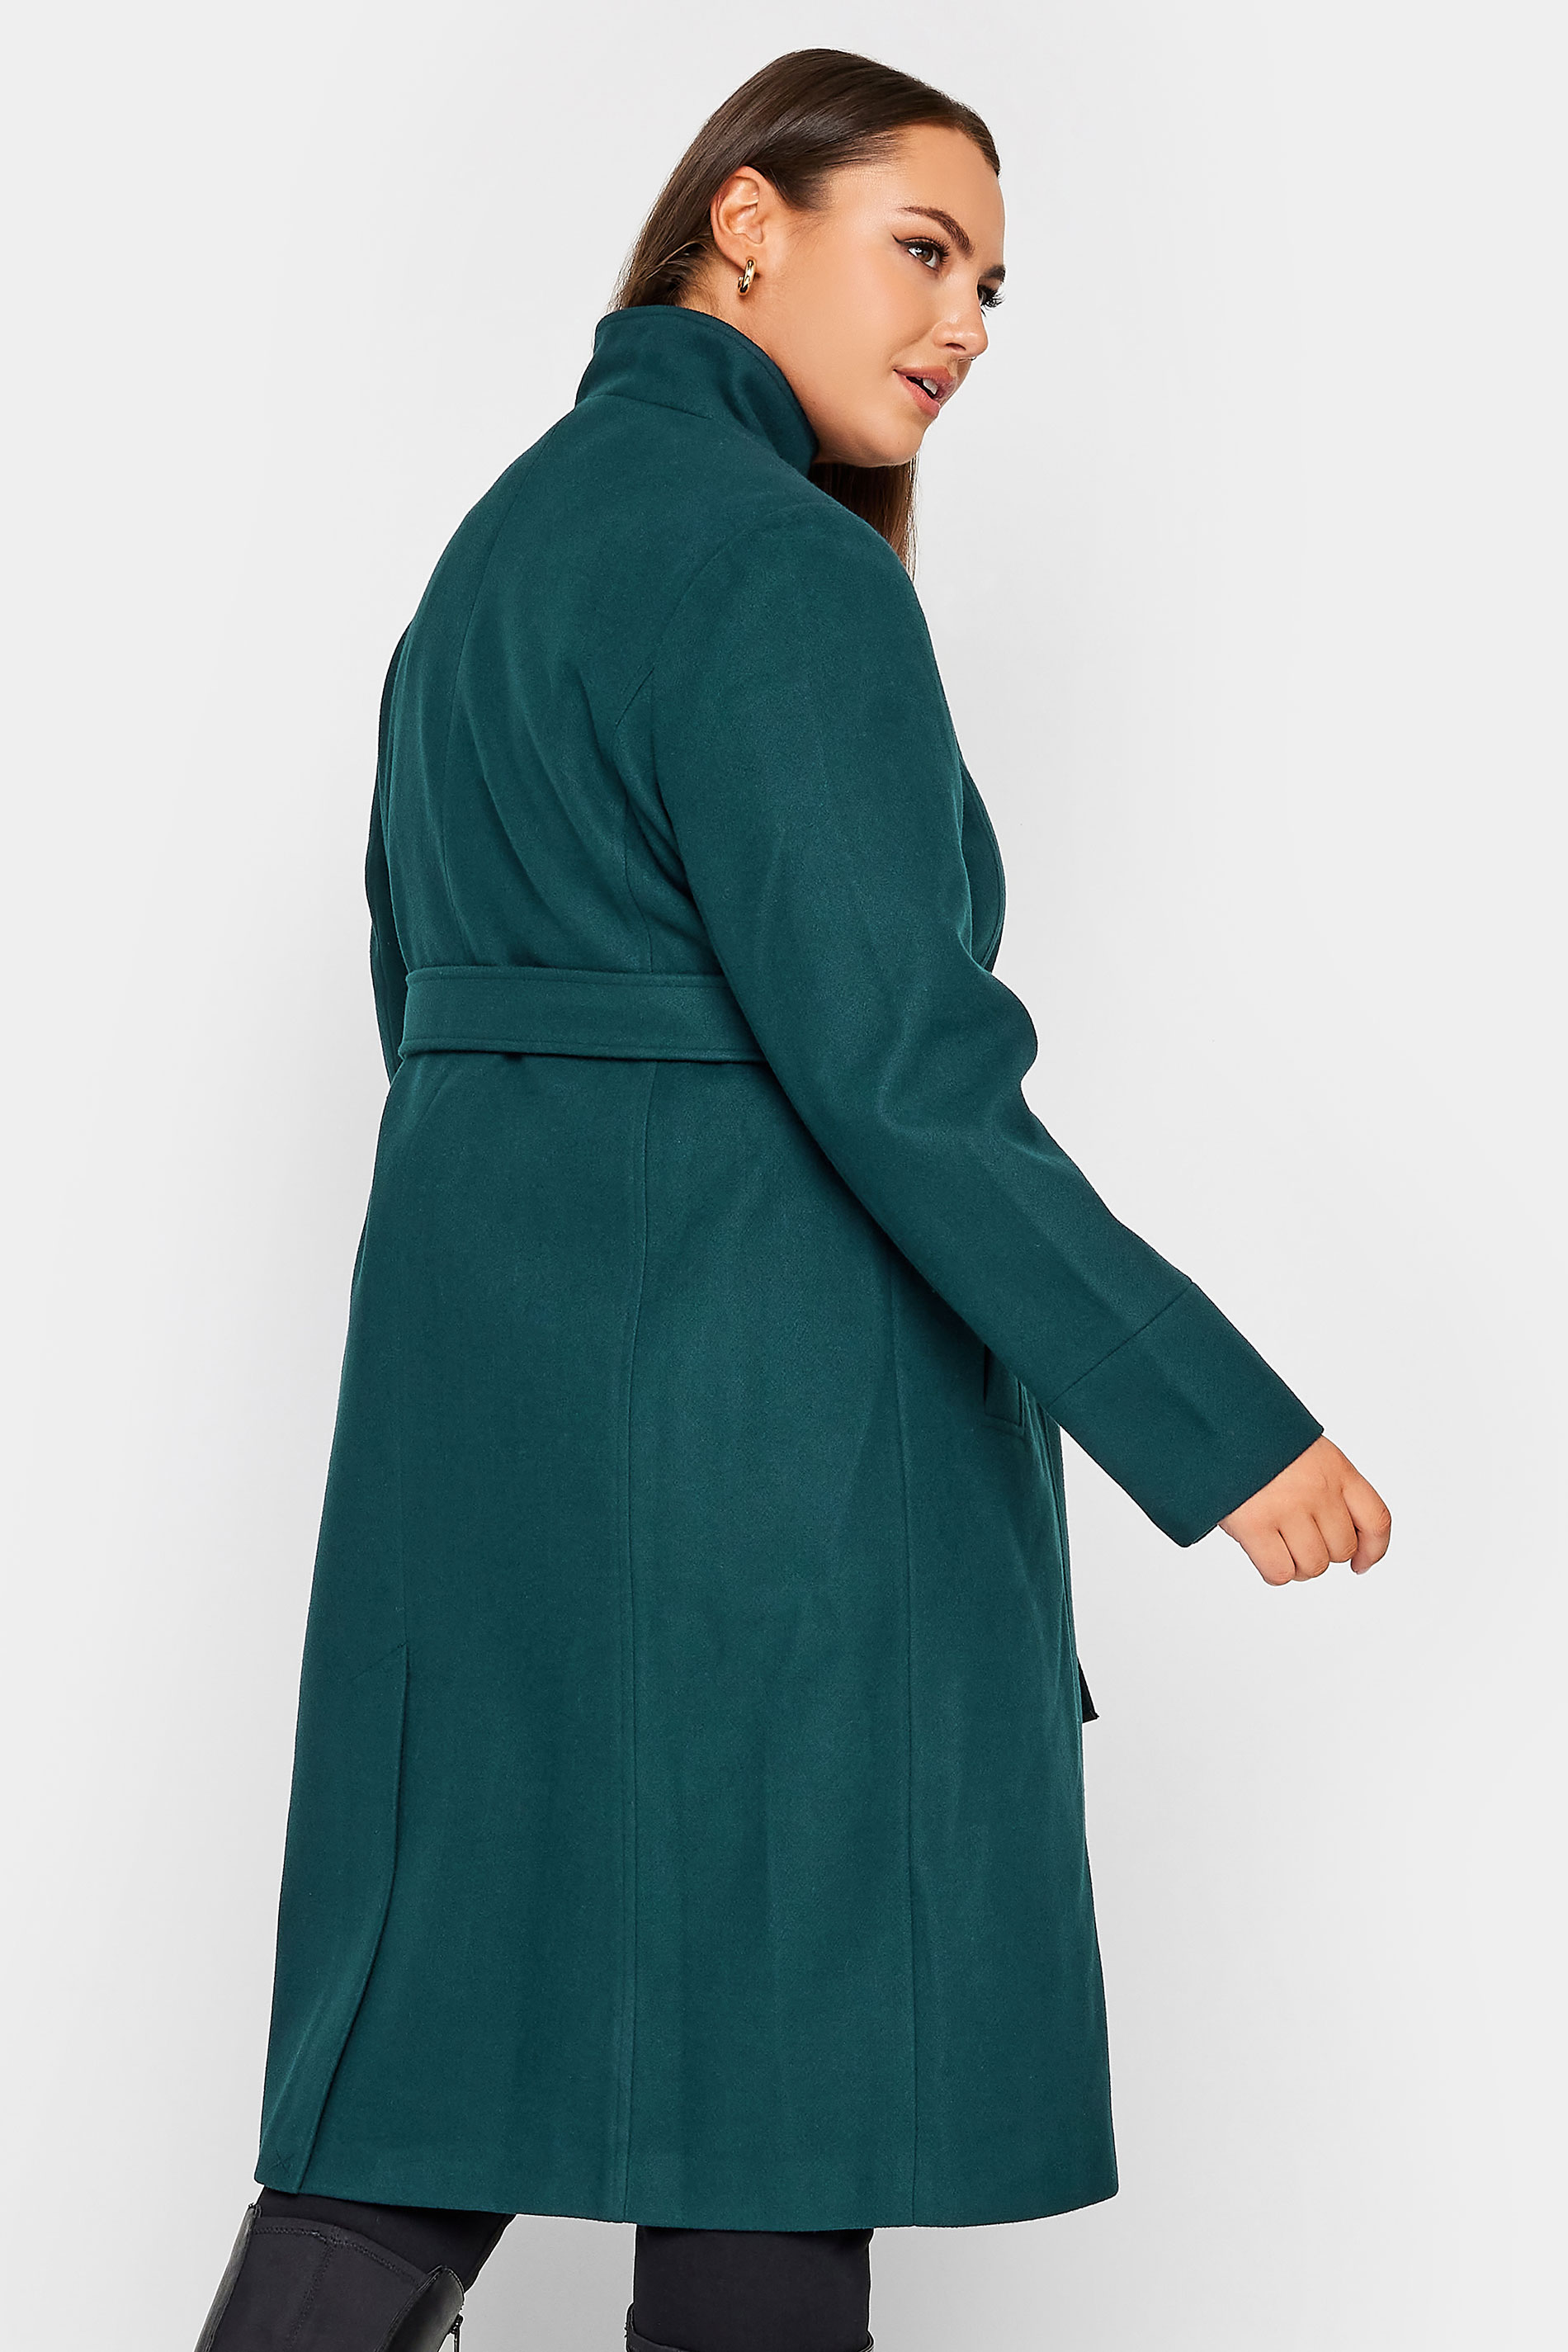 YOURS Curve Plus Size Dark Green Belted Military Coat | Yours Clothing  3